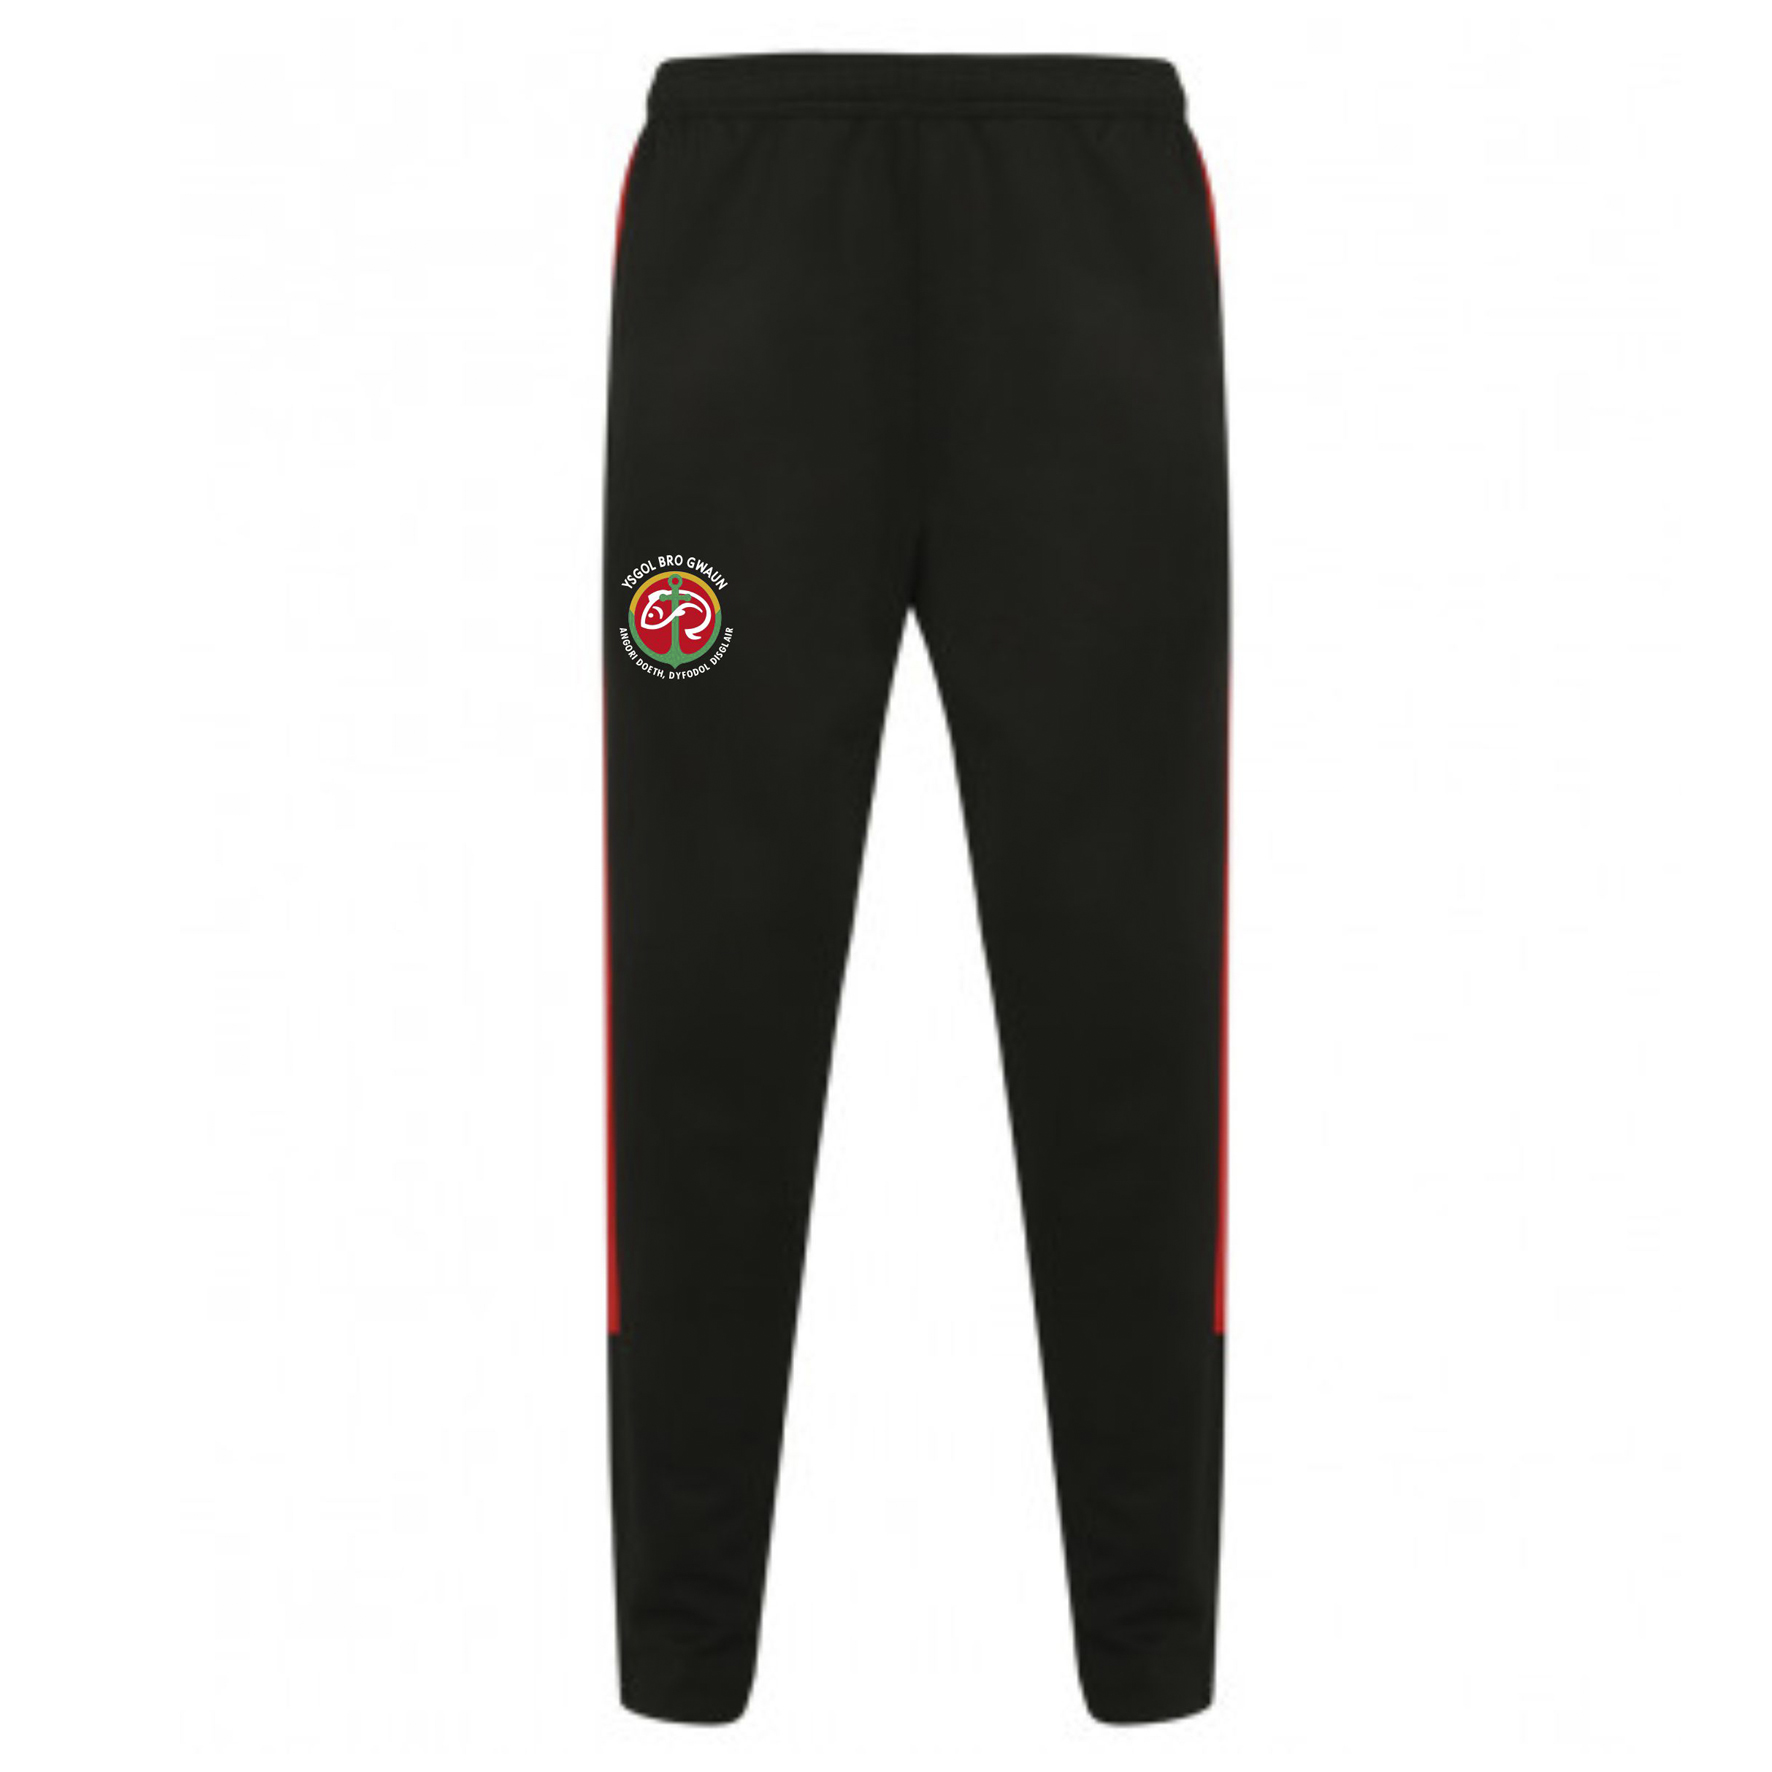 Ysgol Bro Gwaun Black & Red Knitted Sports Tracksuit Pants - R Us Embroidery and Print